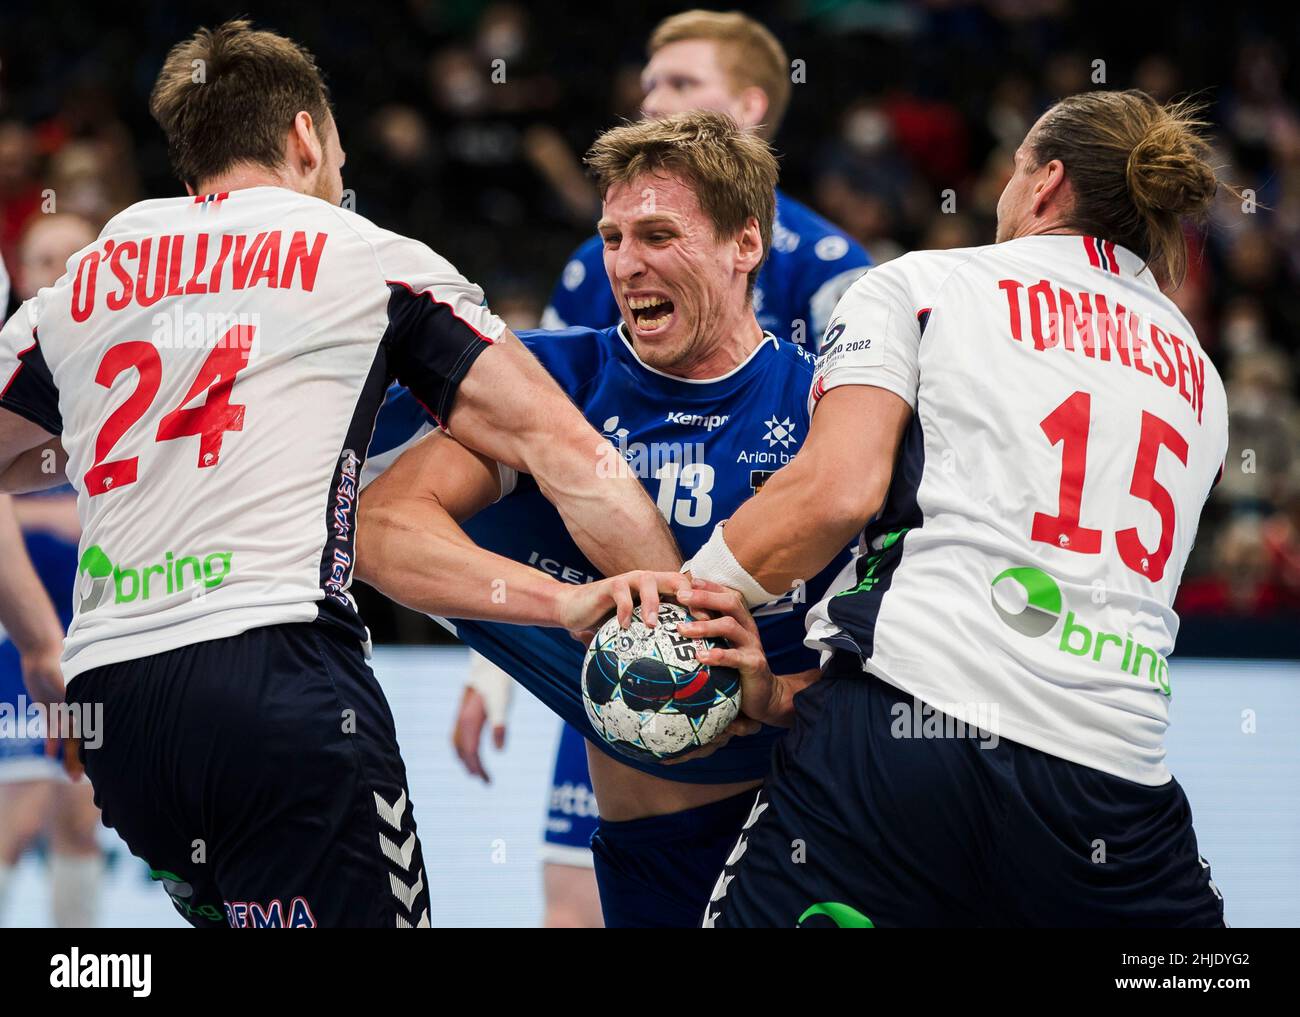 Budapest, Hungary, 28th January 2022. Olafur Andres Gudmundsson of Iceland in action during the Men's EHF EURO 2022, Fifth Place Match between Iceland v Norway in Budapest, Hungary. January 28, 2022. Credit: Nikola Krstic/Alamy Stock Photo